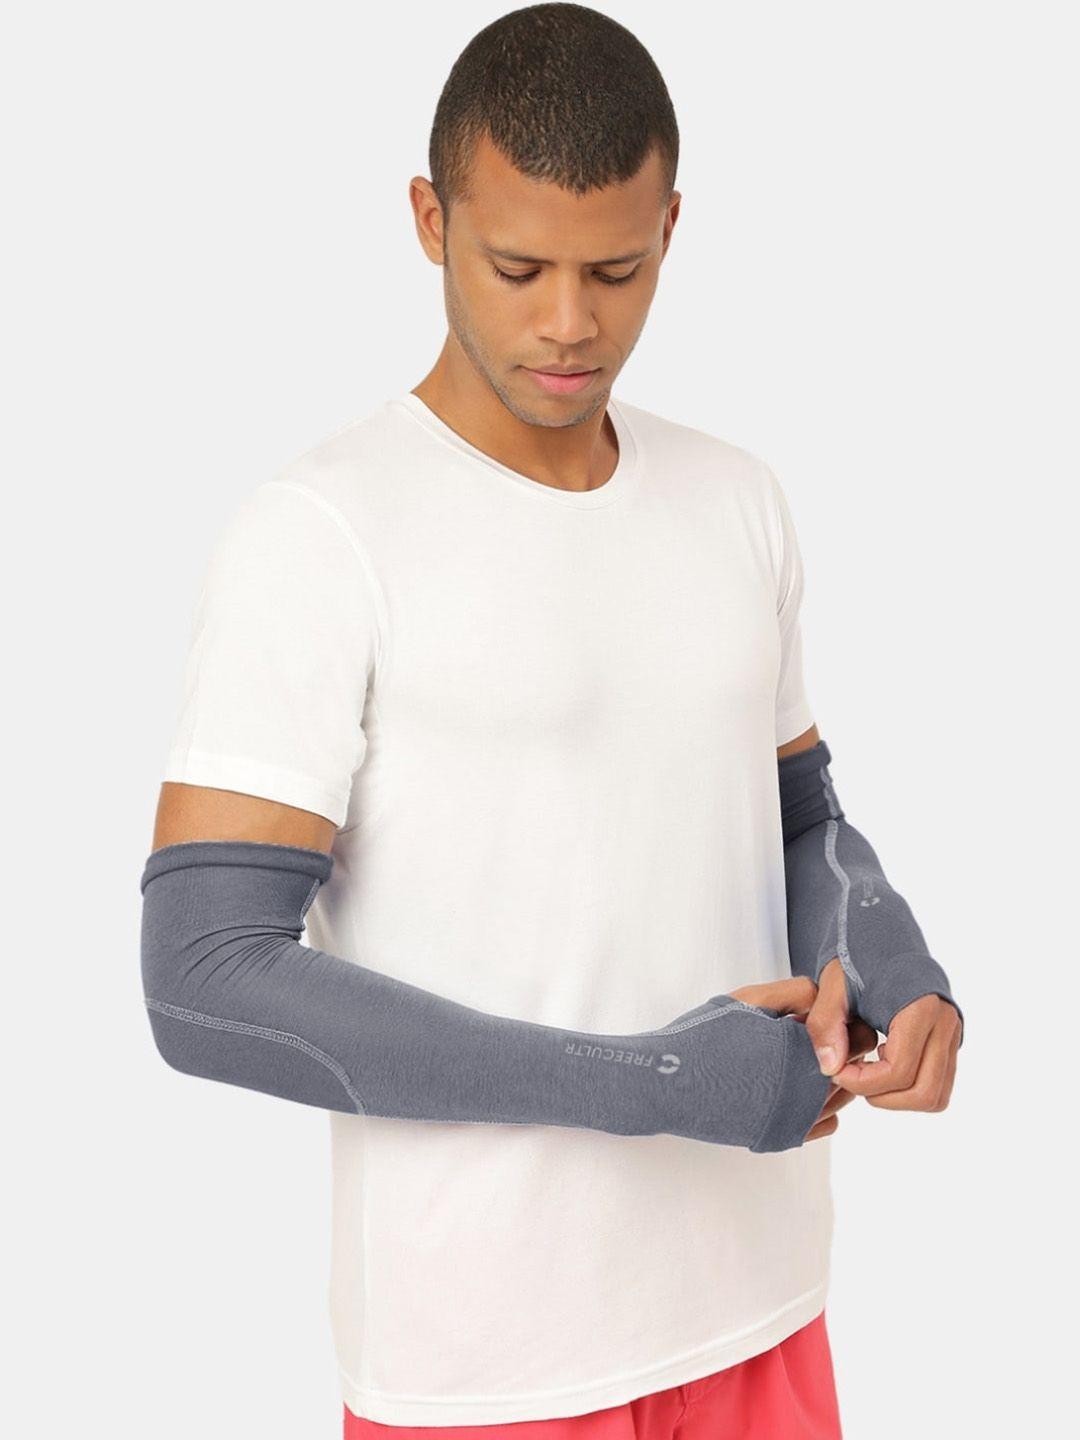 freecultr breatheable bamboo cotton antibacterial arm sleeves gloves